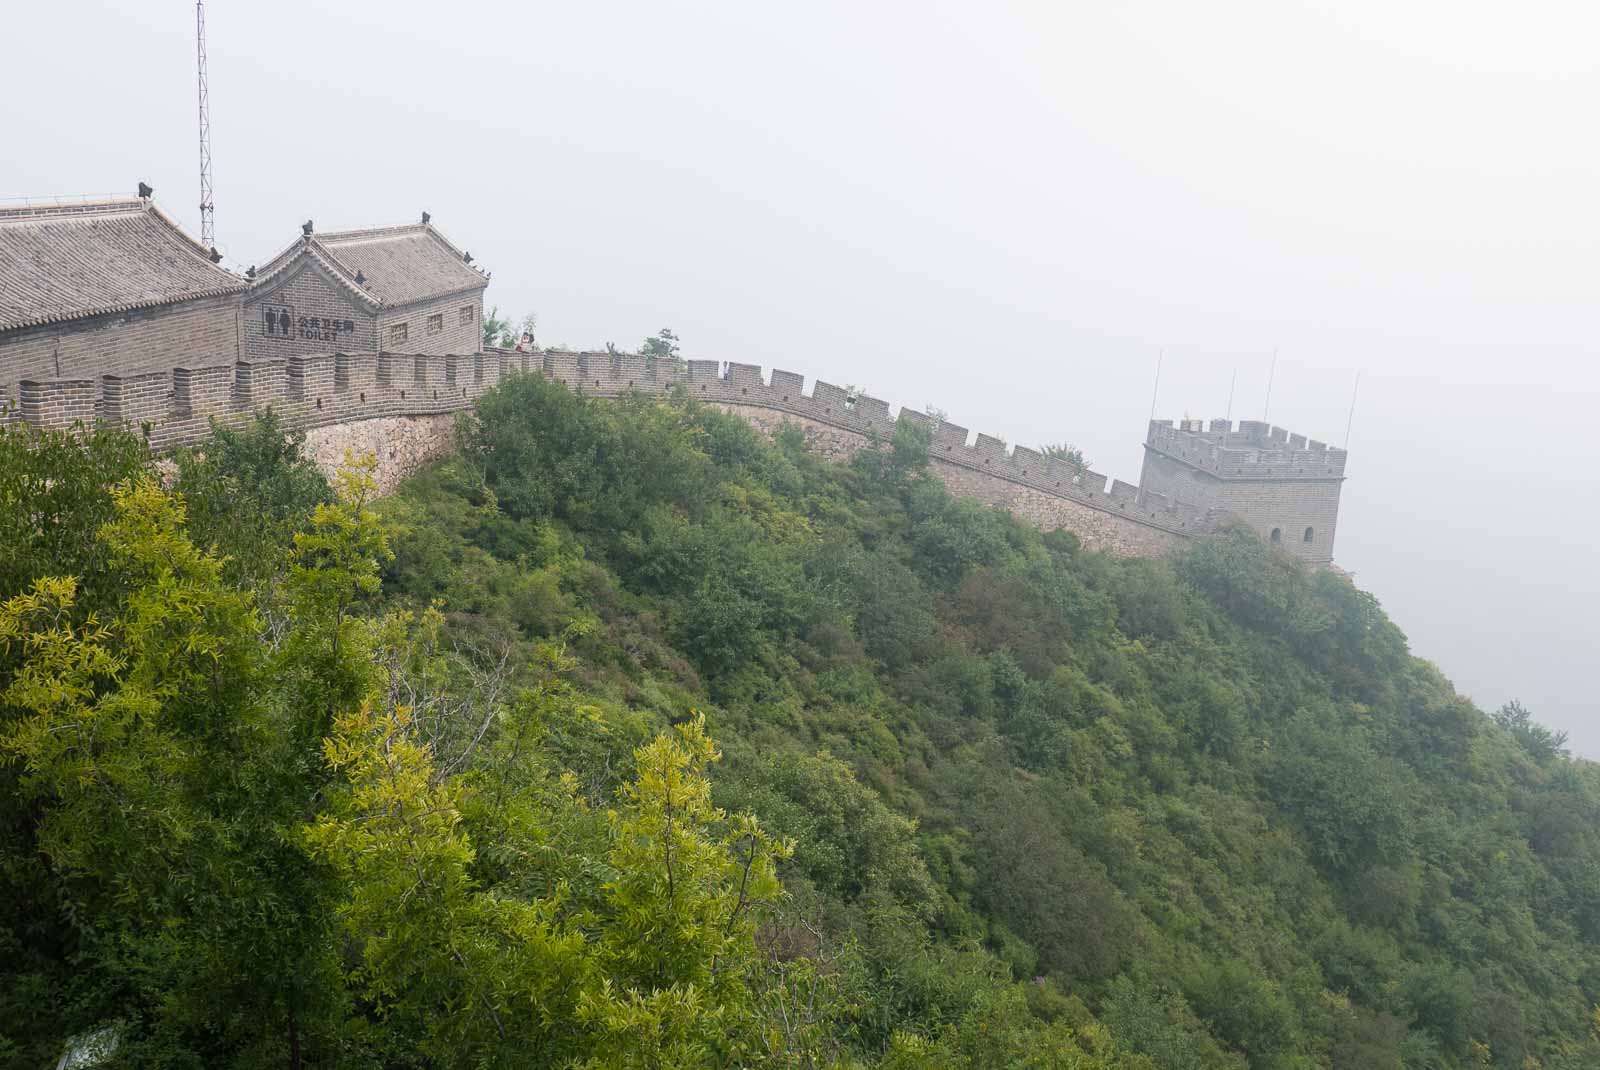 Great Wall of China, shrouded in mist and surrounded by greenery.